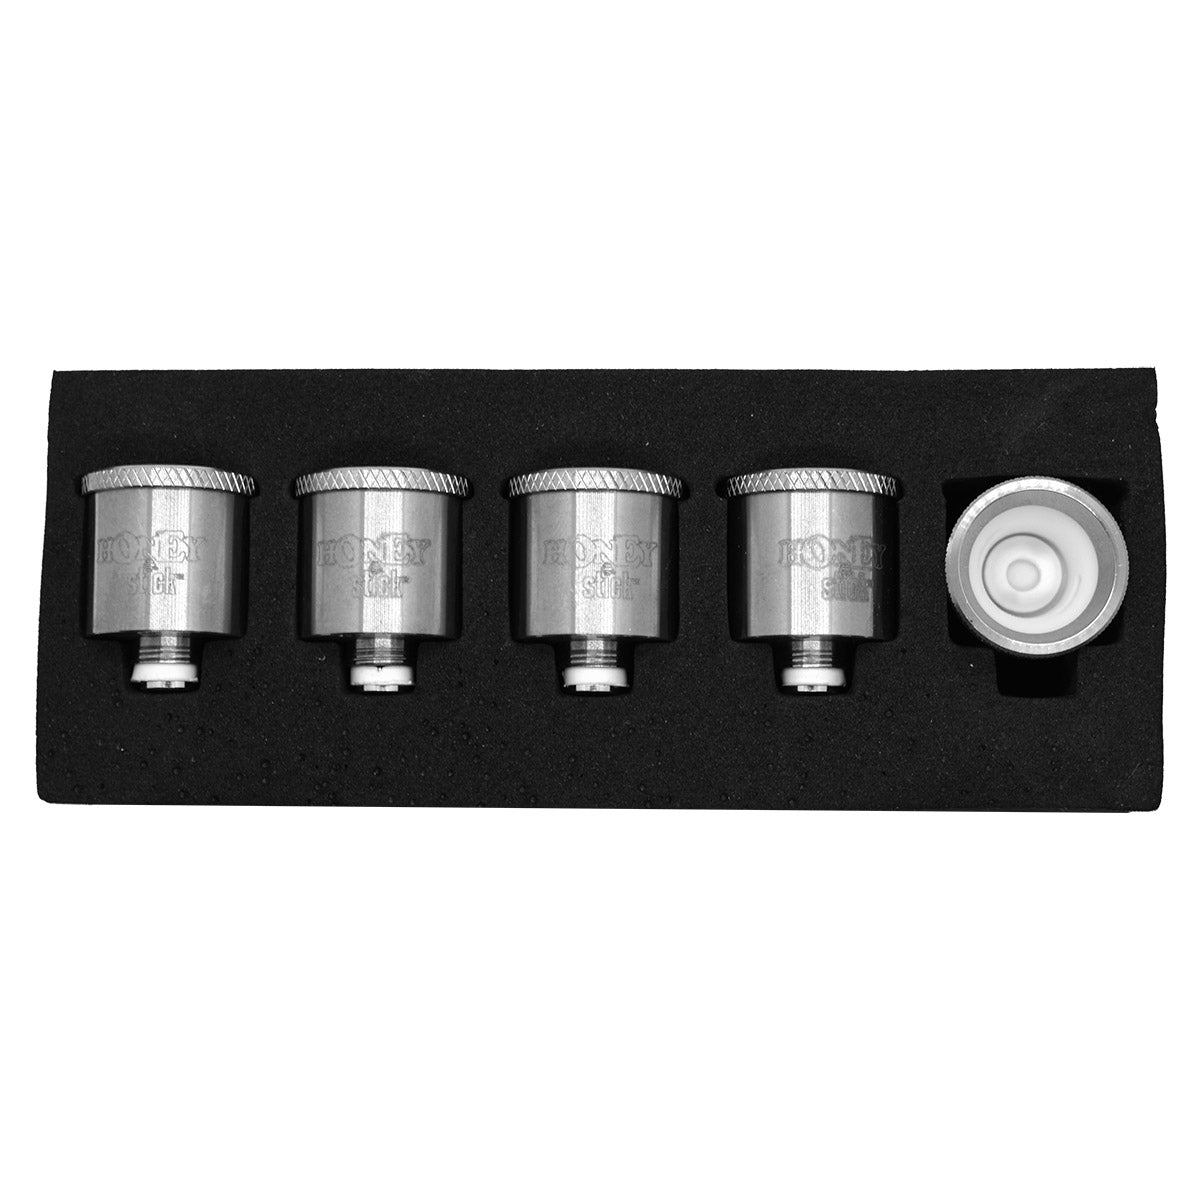 Ceramic Bowl Wax Heater Replacement for Extreme Atomizer - 5 Pack